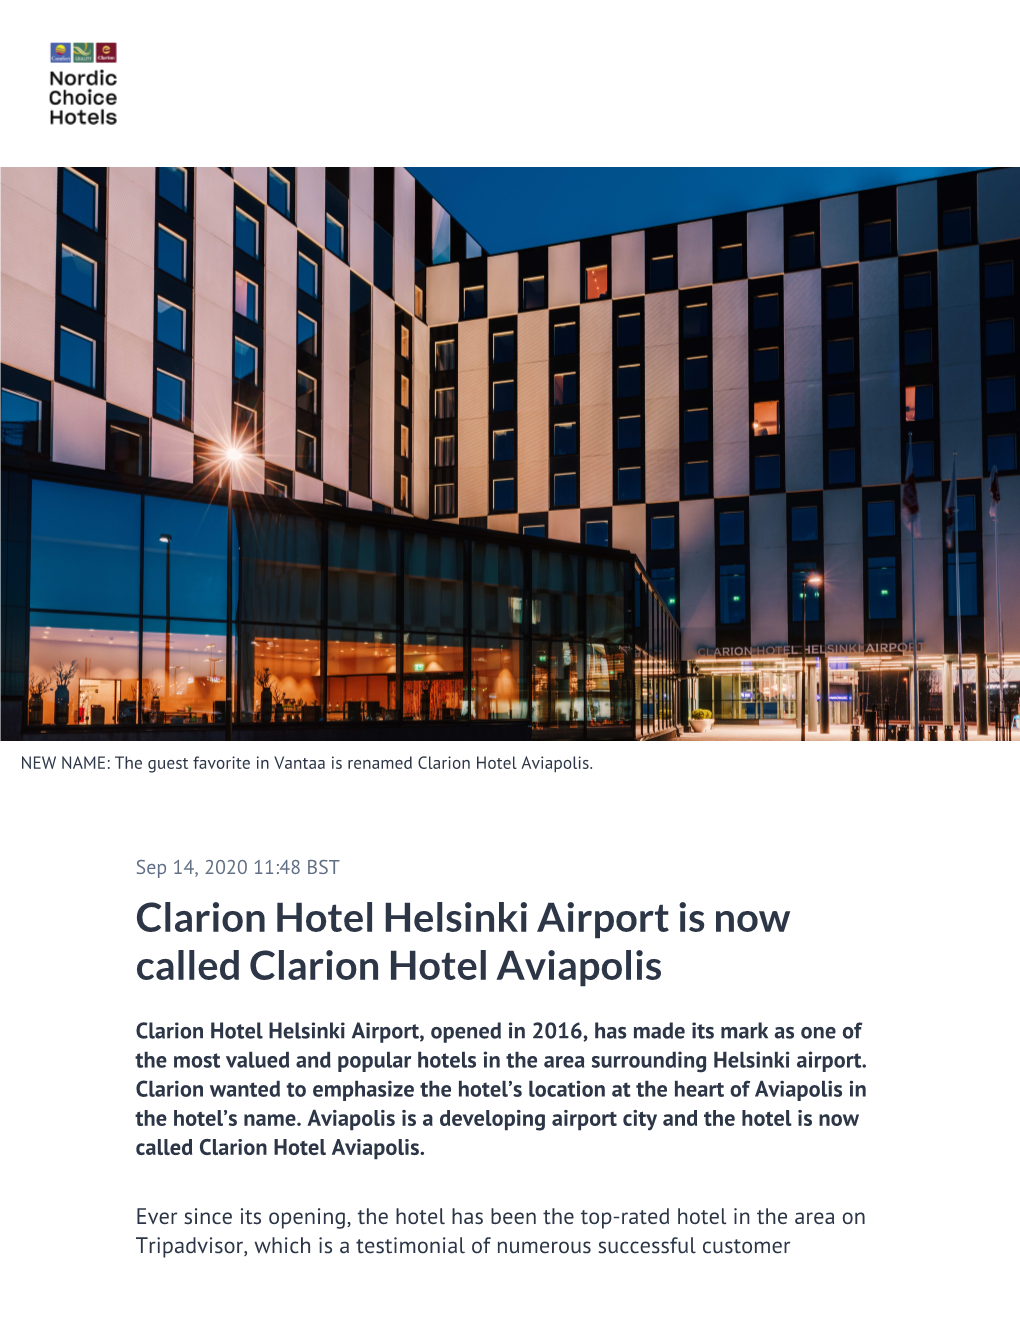 Clarion Hotel Helsinki Airport Is Now Called Clarion Hotel Aviapolis